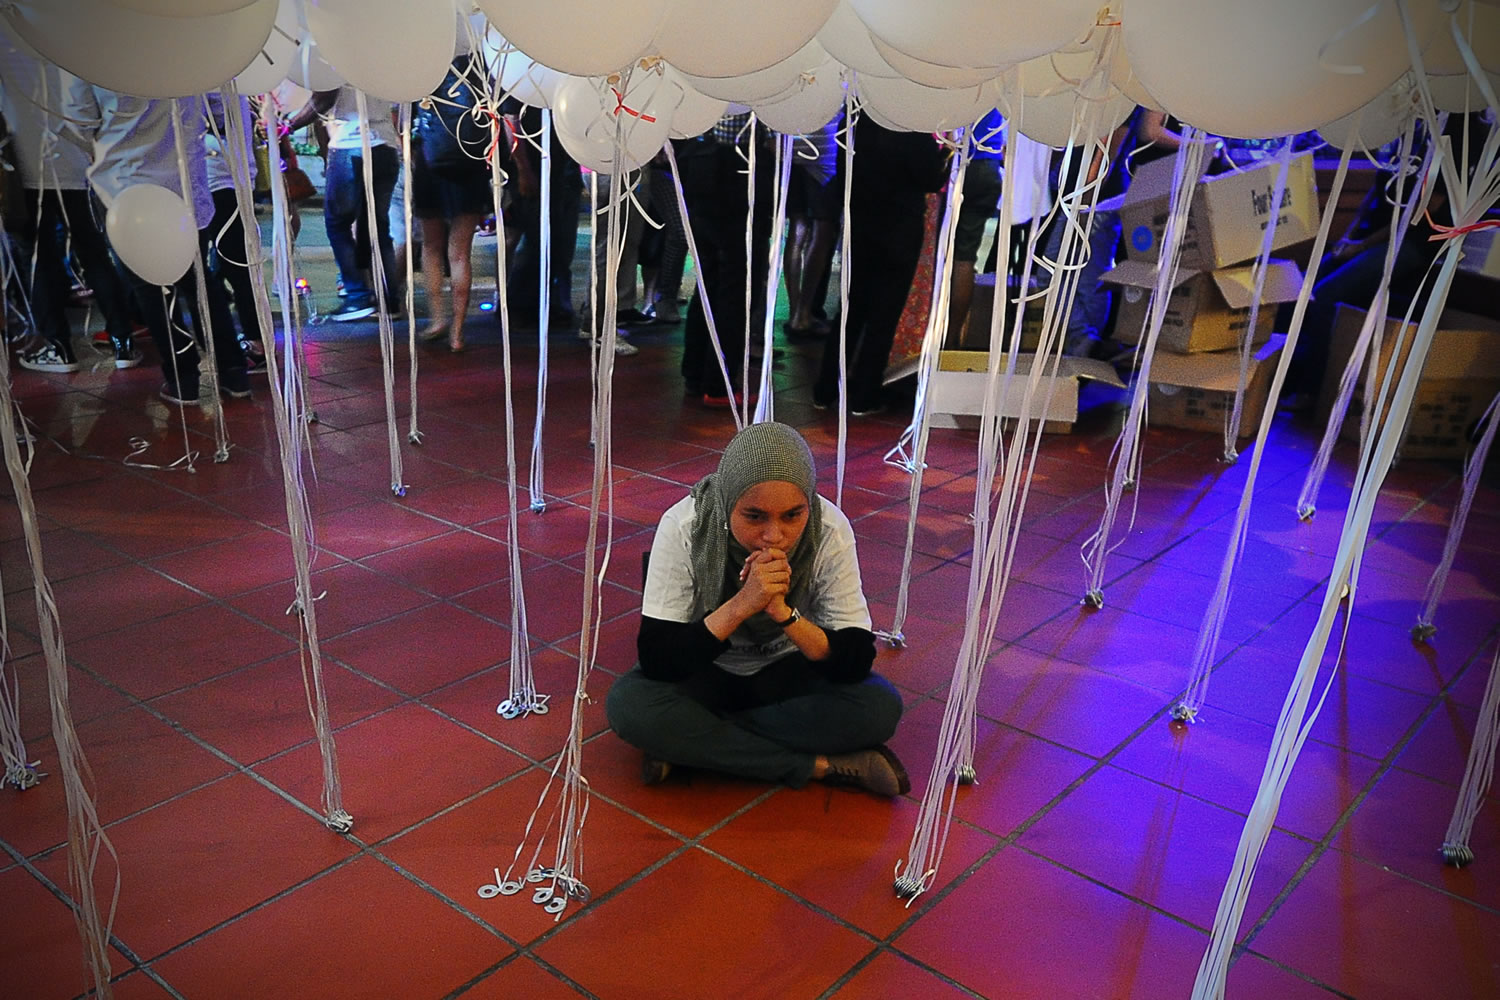 A Malaysian Muslim woman pauses during an event for the missing Malaysia Airline MH370 at a shopping mall in Petaling Jaya, on the outskirt of Kuala Lumpur, Malaysia, on Tuesday.